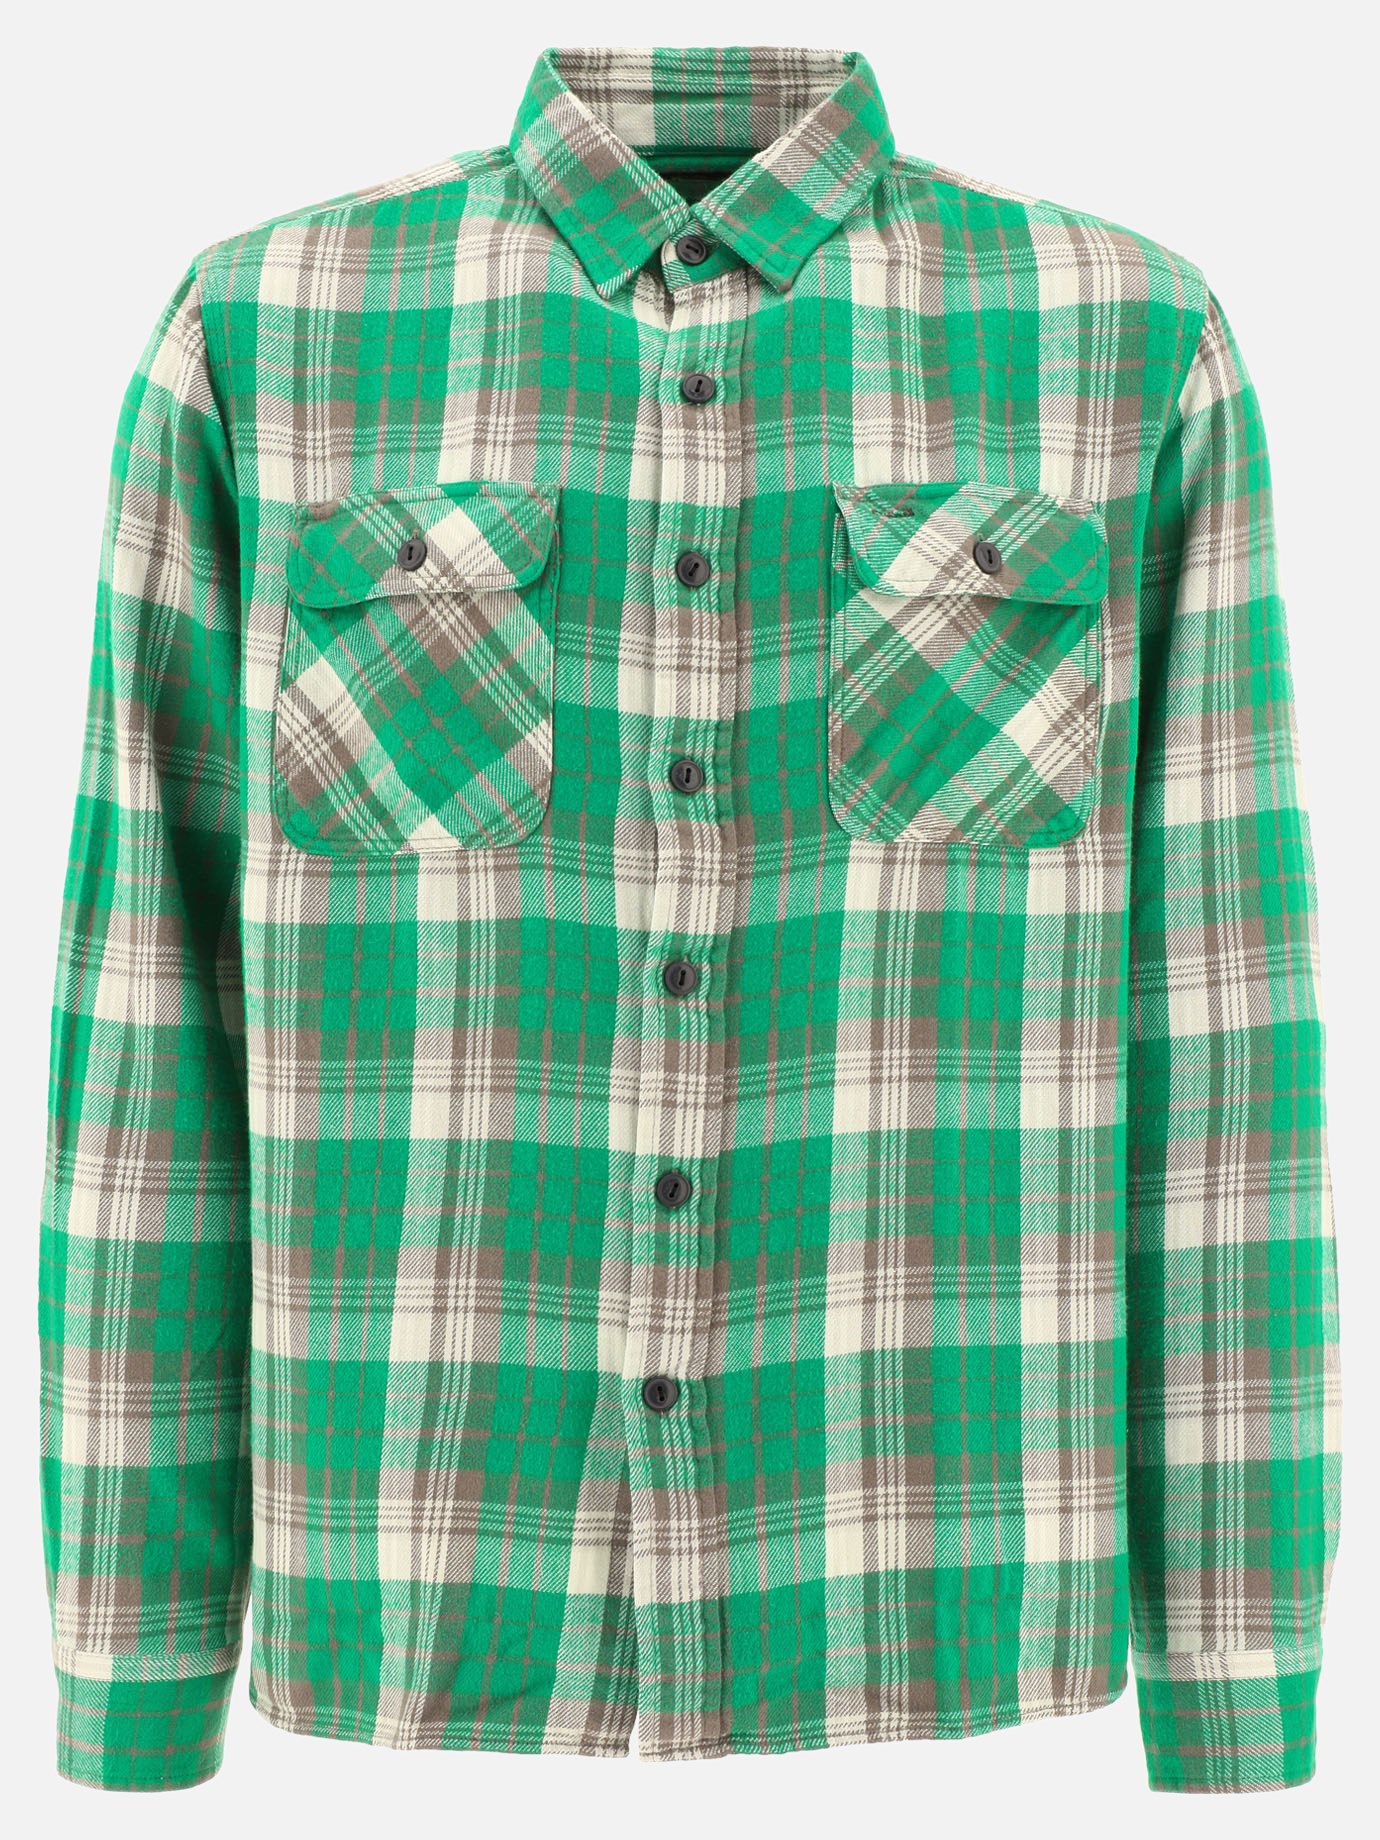 Checked flannel shirt by RRL by Ralph Lauren